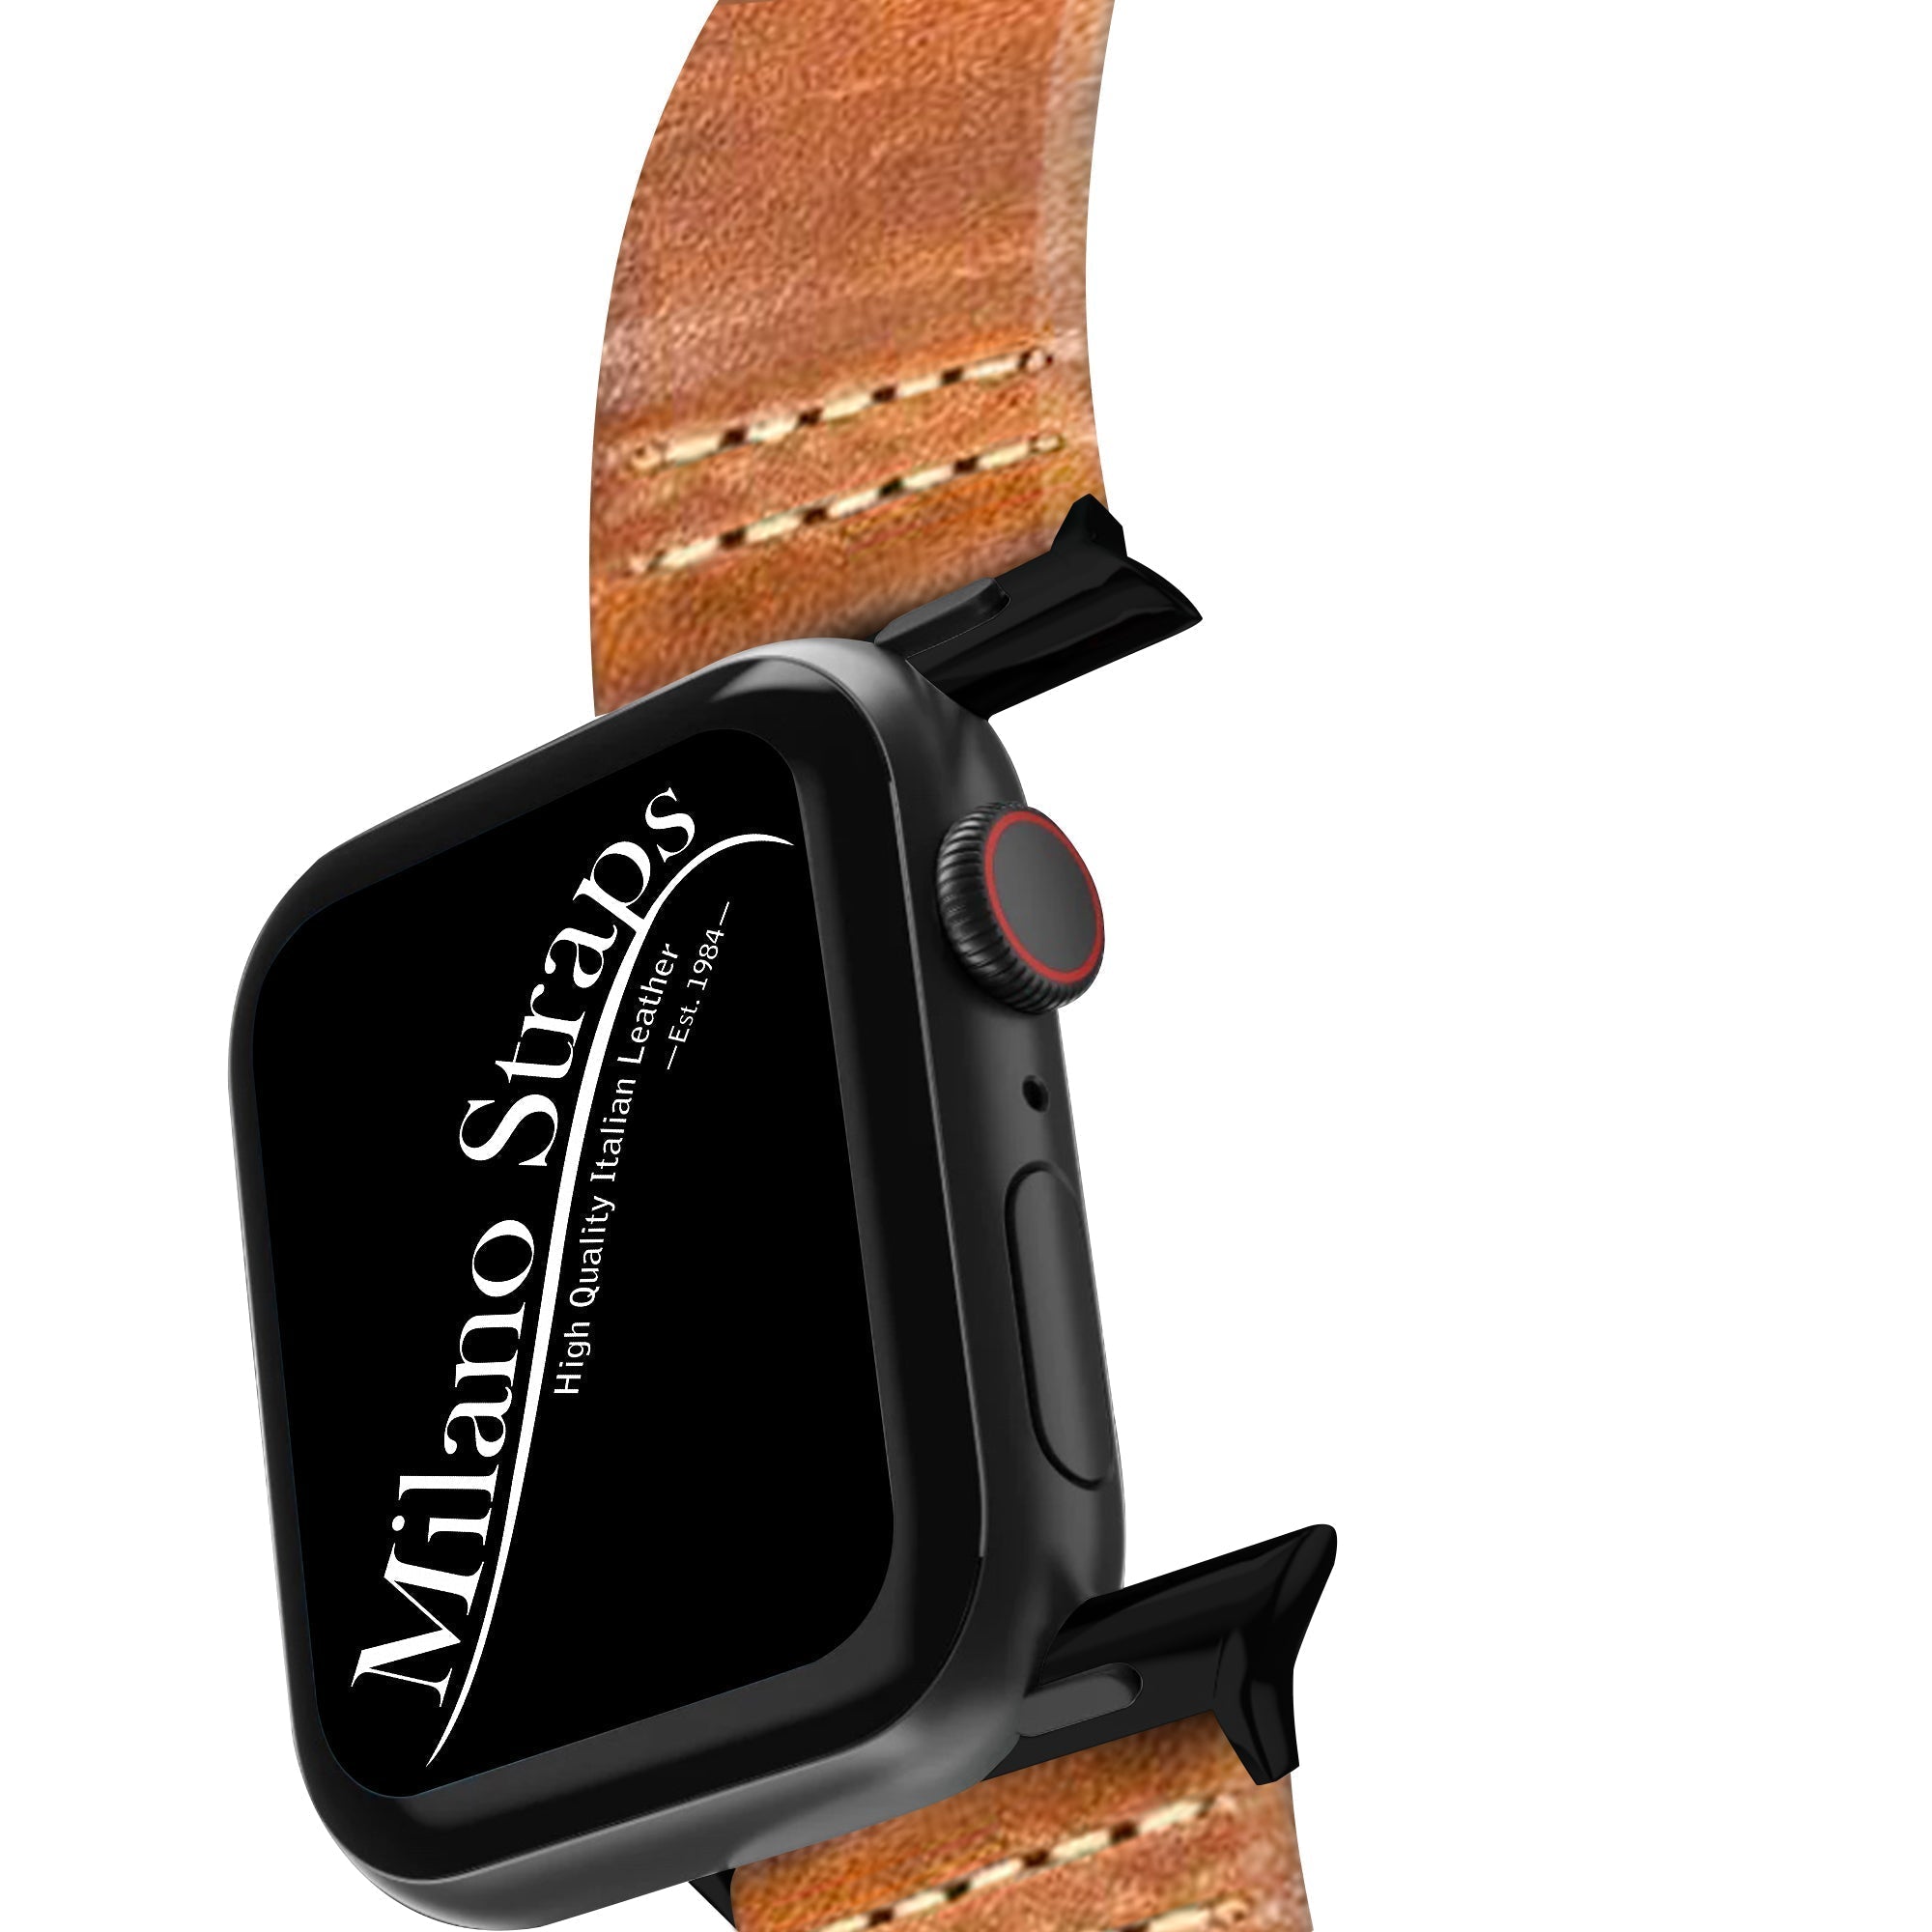 Apple Watch Leather Band ™ Cognac Vintage Double Stitching - Milano Straps